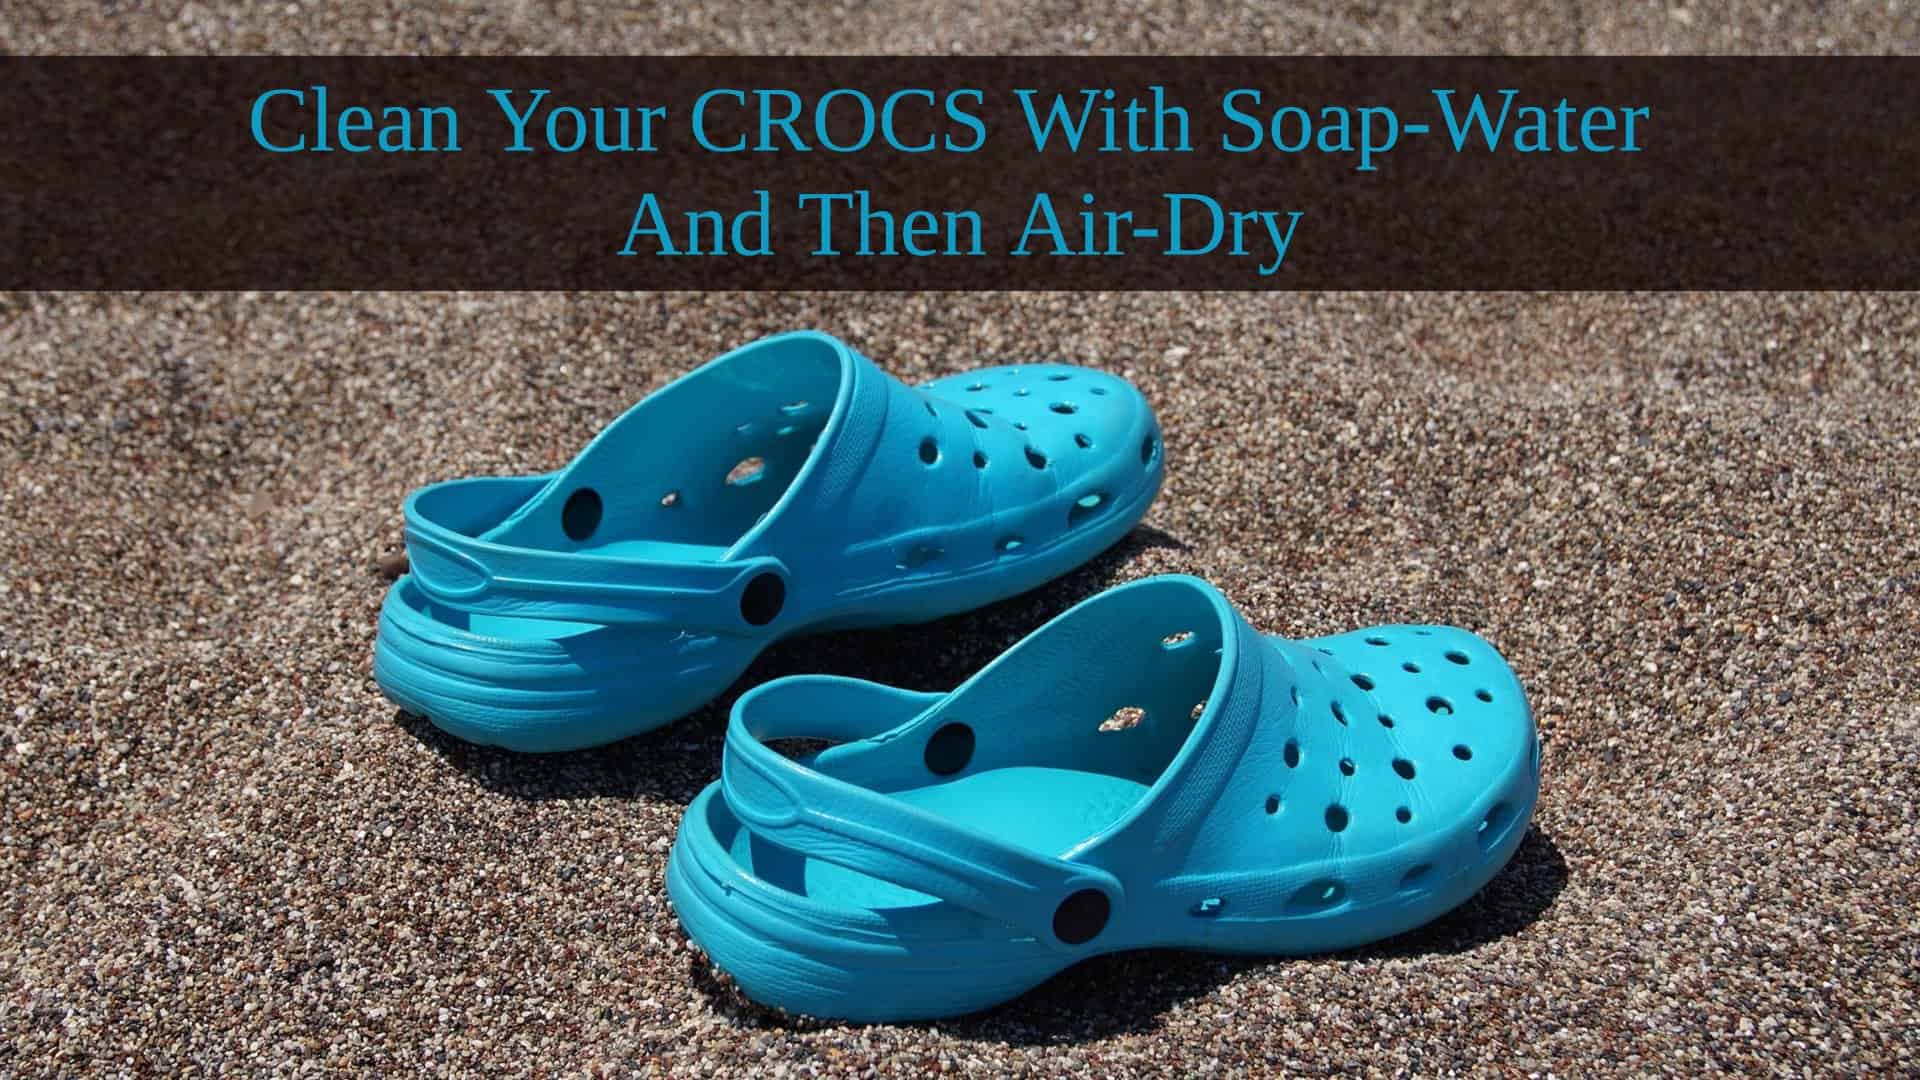 Clean-Your-Crocs-With-Soap-Water-And-Then-Air-Dry